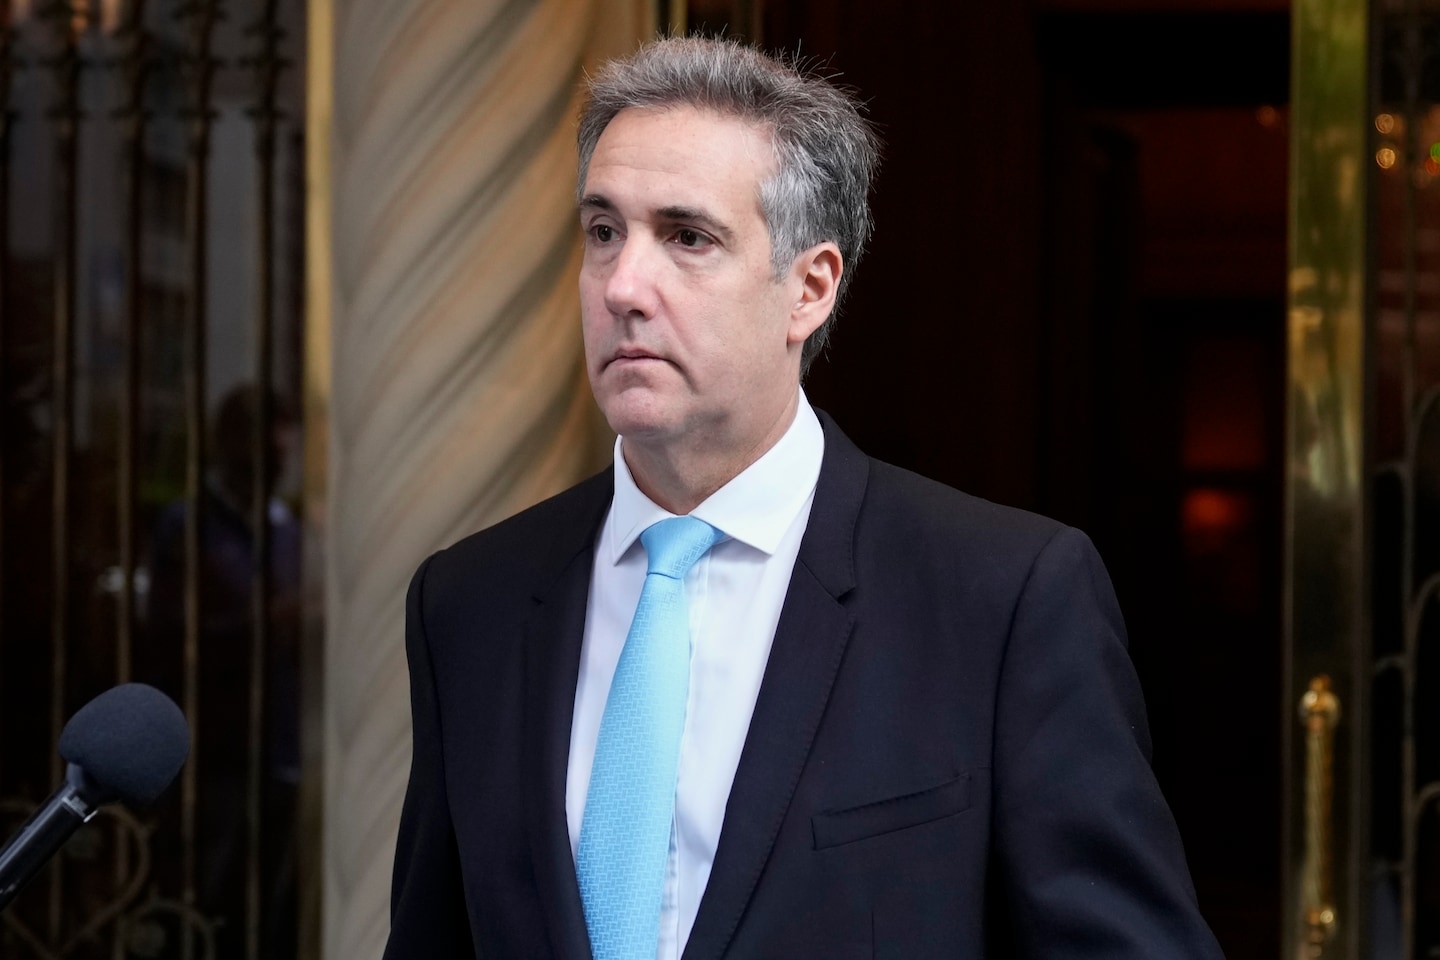 Michael Cohen testifies for the second day in the hush money trial against Trump